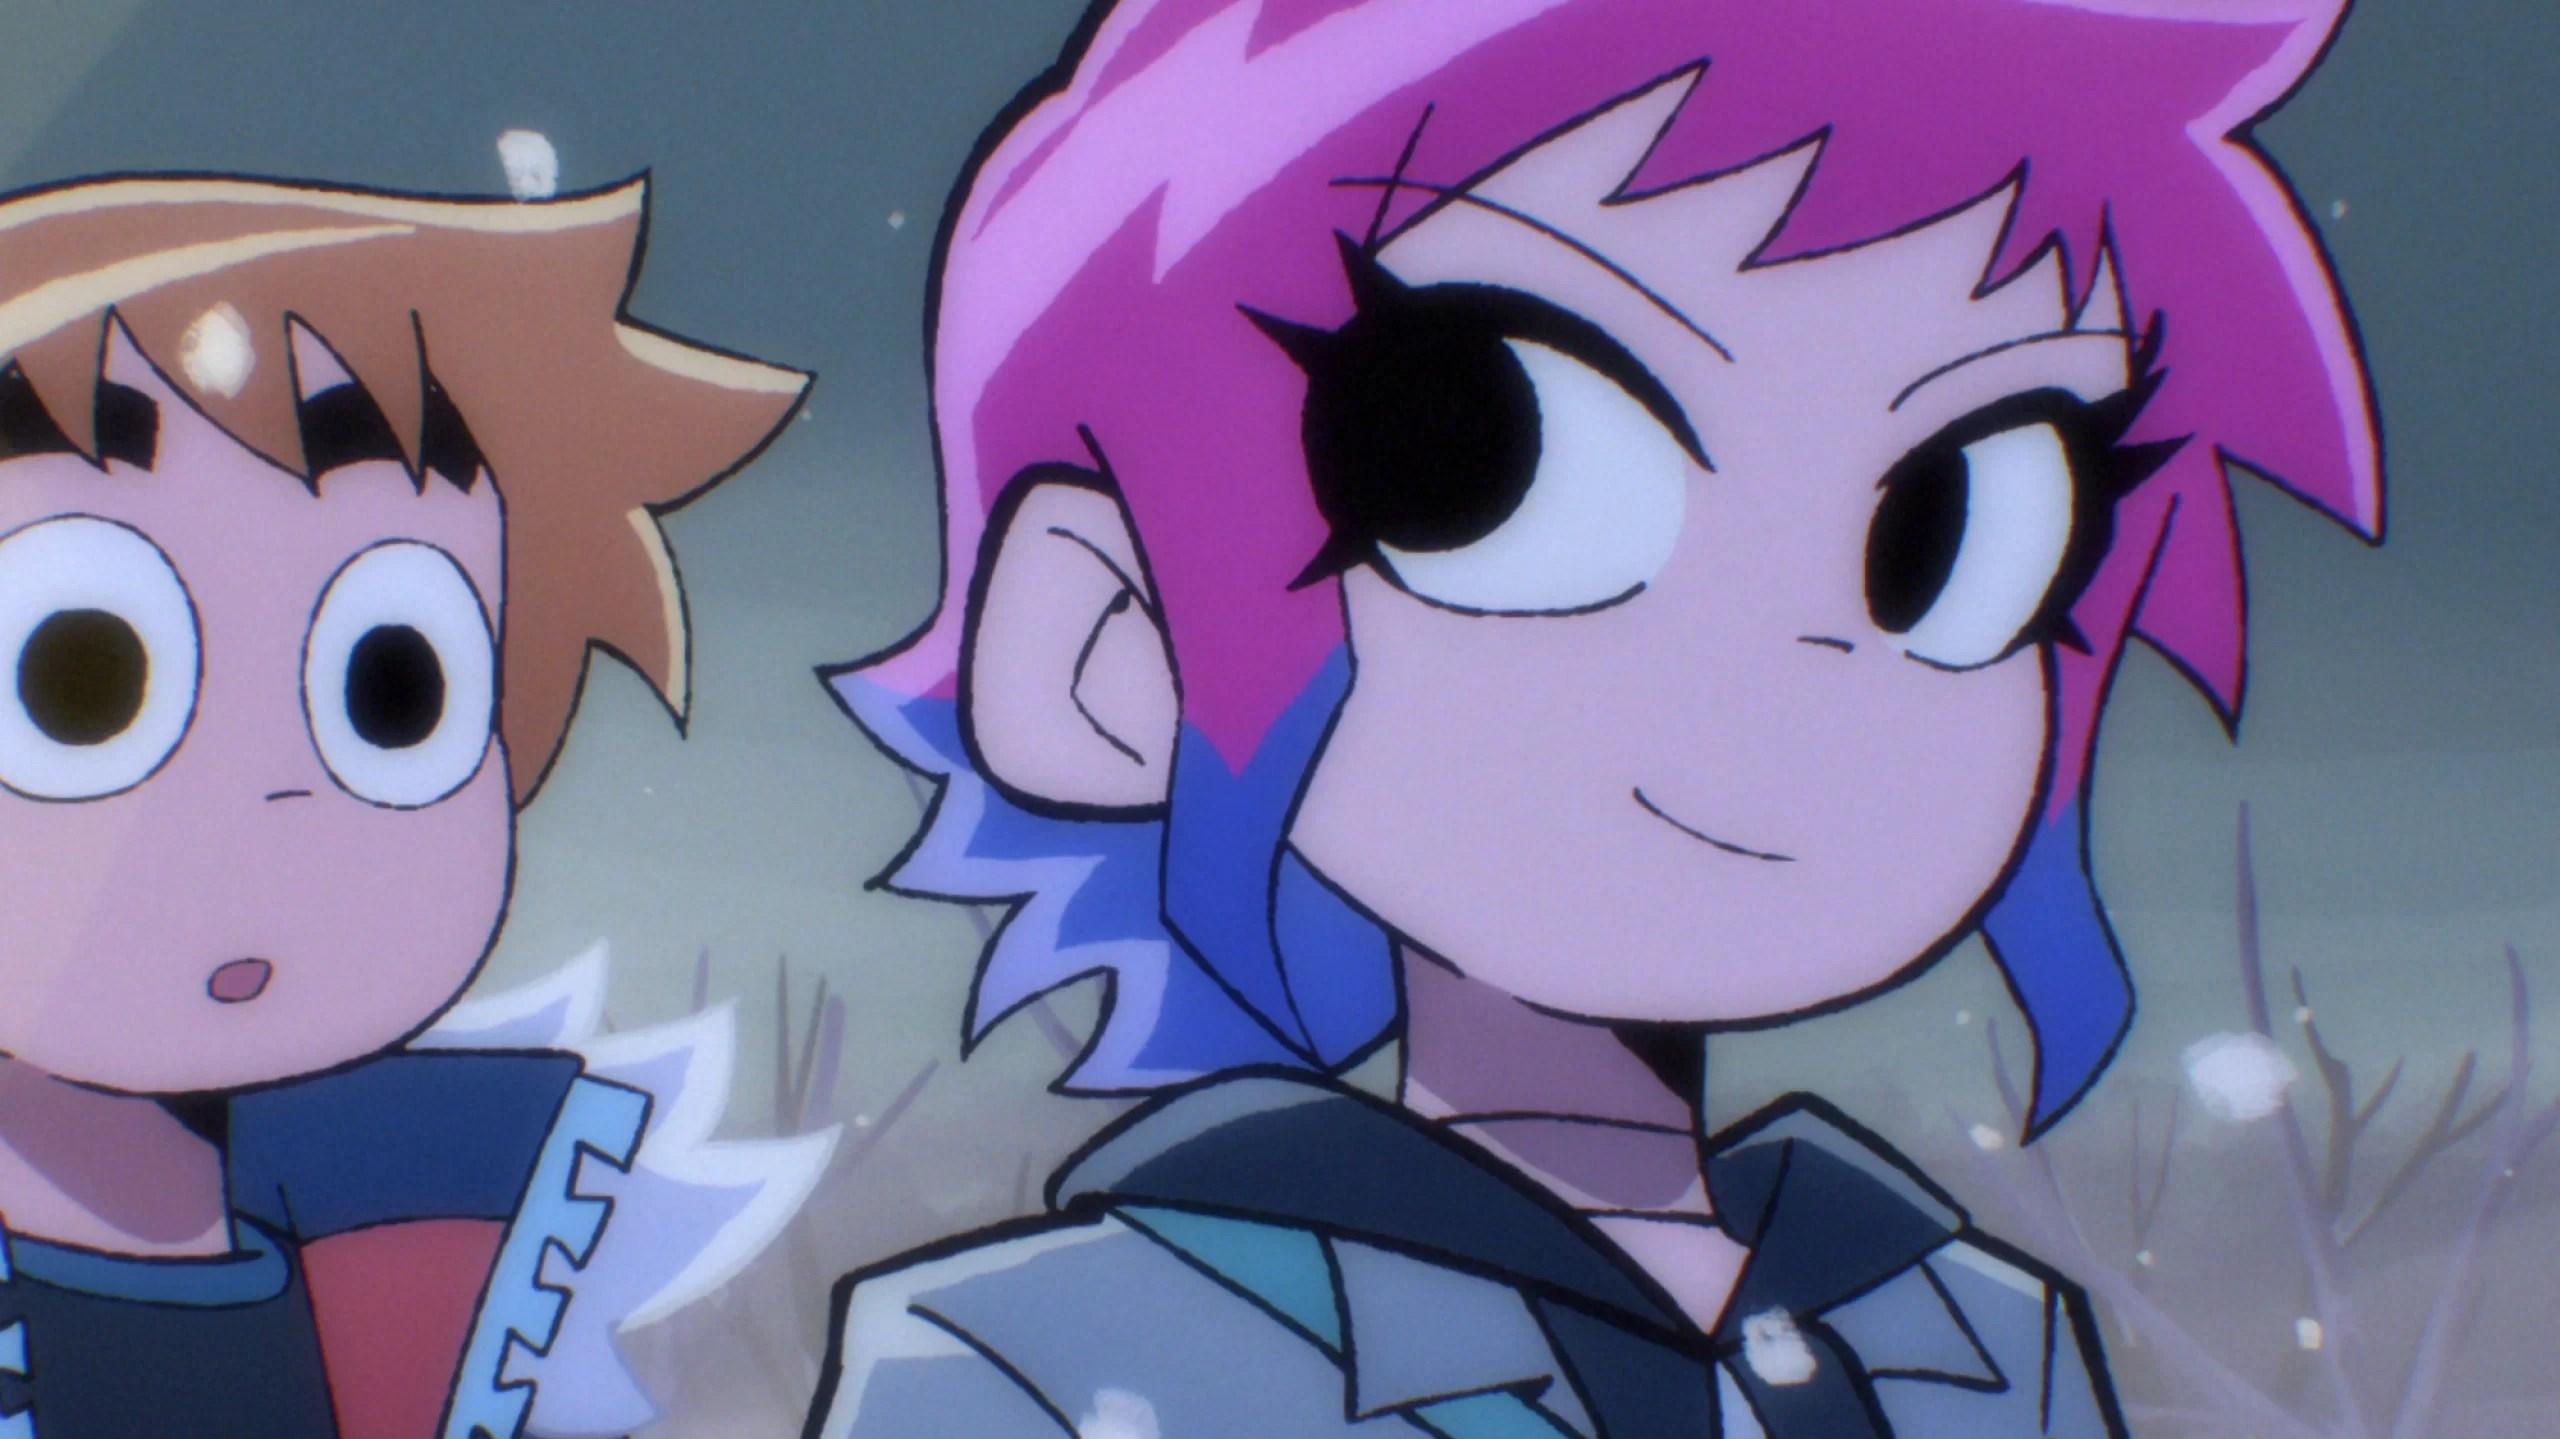 Scott Pilgrim Anime What scenes from the movie can we expect